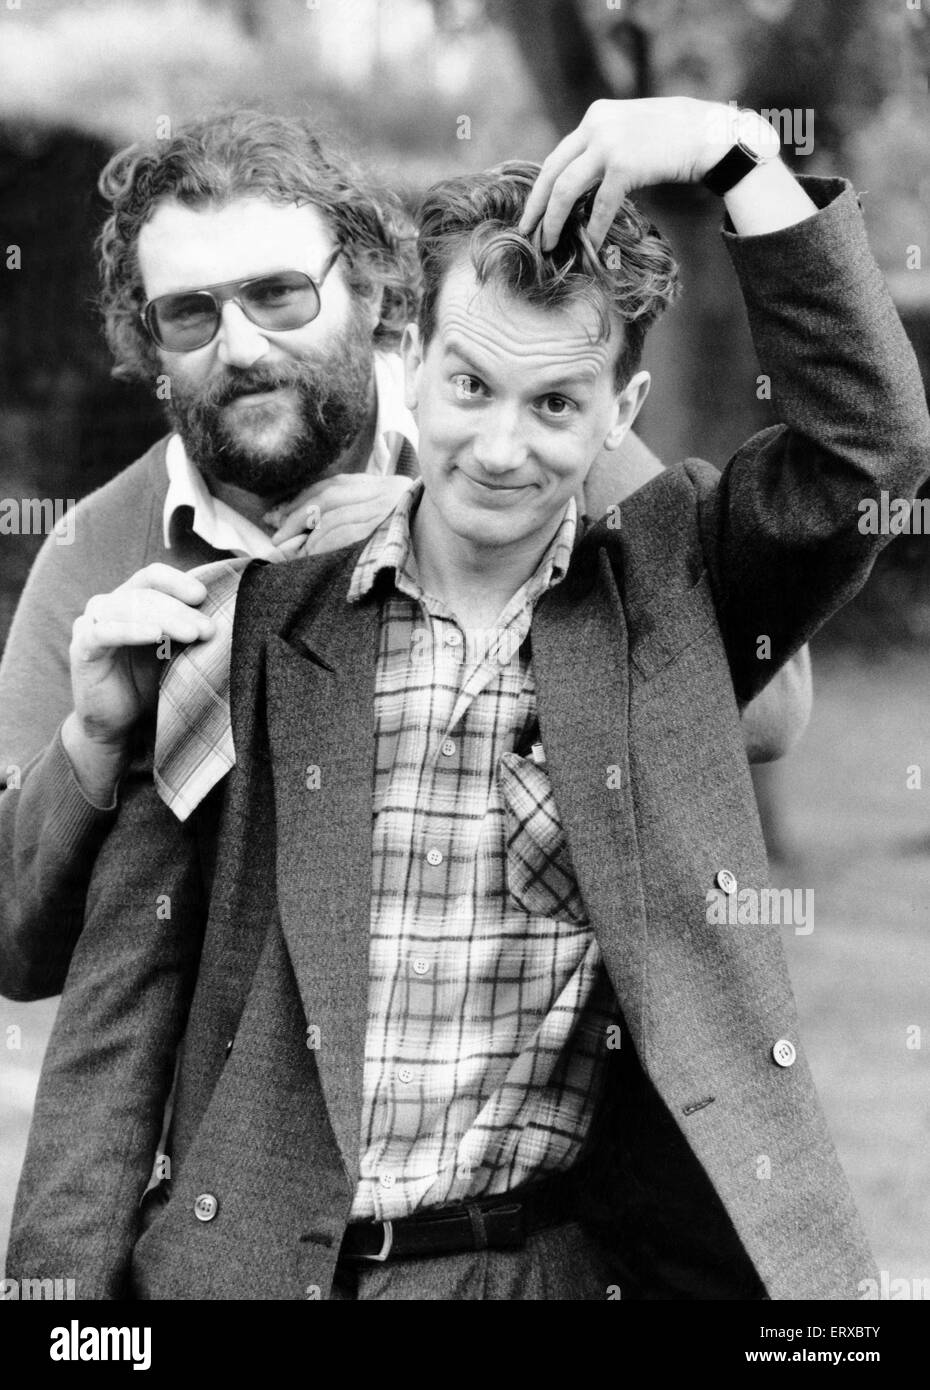 Frank Skinner aka Graham Christopher Collins with Malcolm Bailey (head of drama at Halesowen), they are a  business partnership. At the time of this picture Frank Skinner was a part time English lecturer at Halesowen and also doing comedy. 11th October 1989 Stock Photo